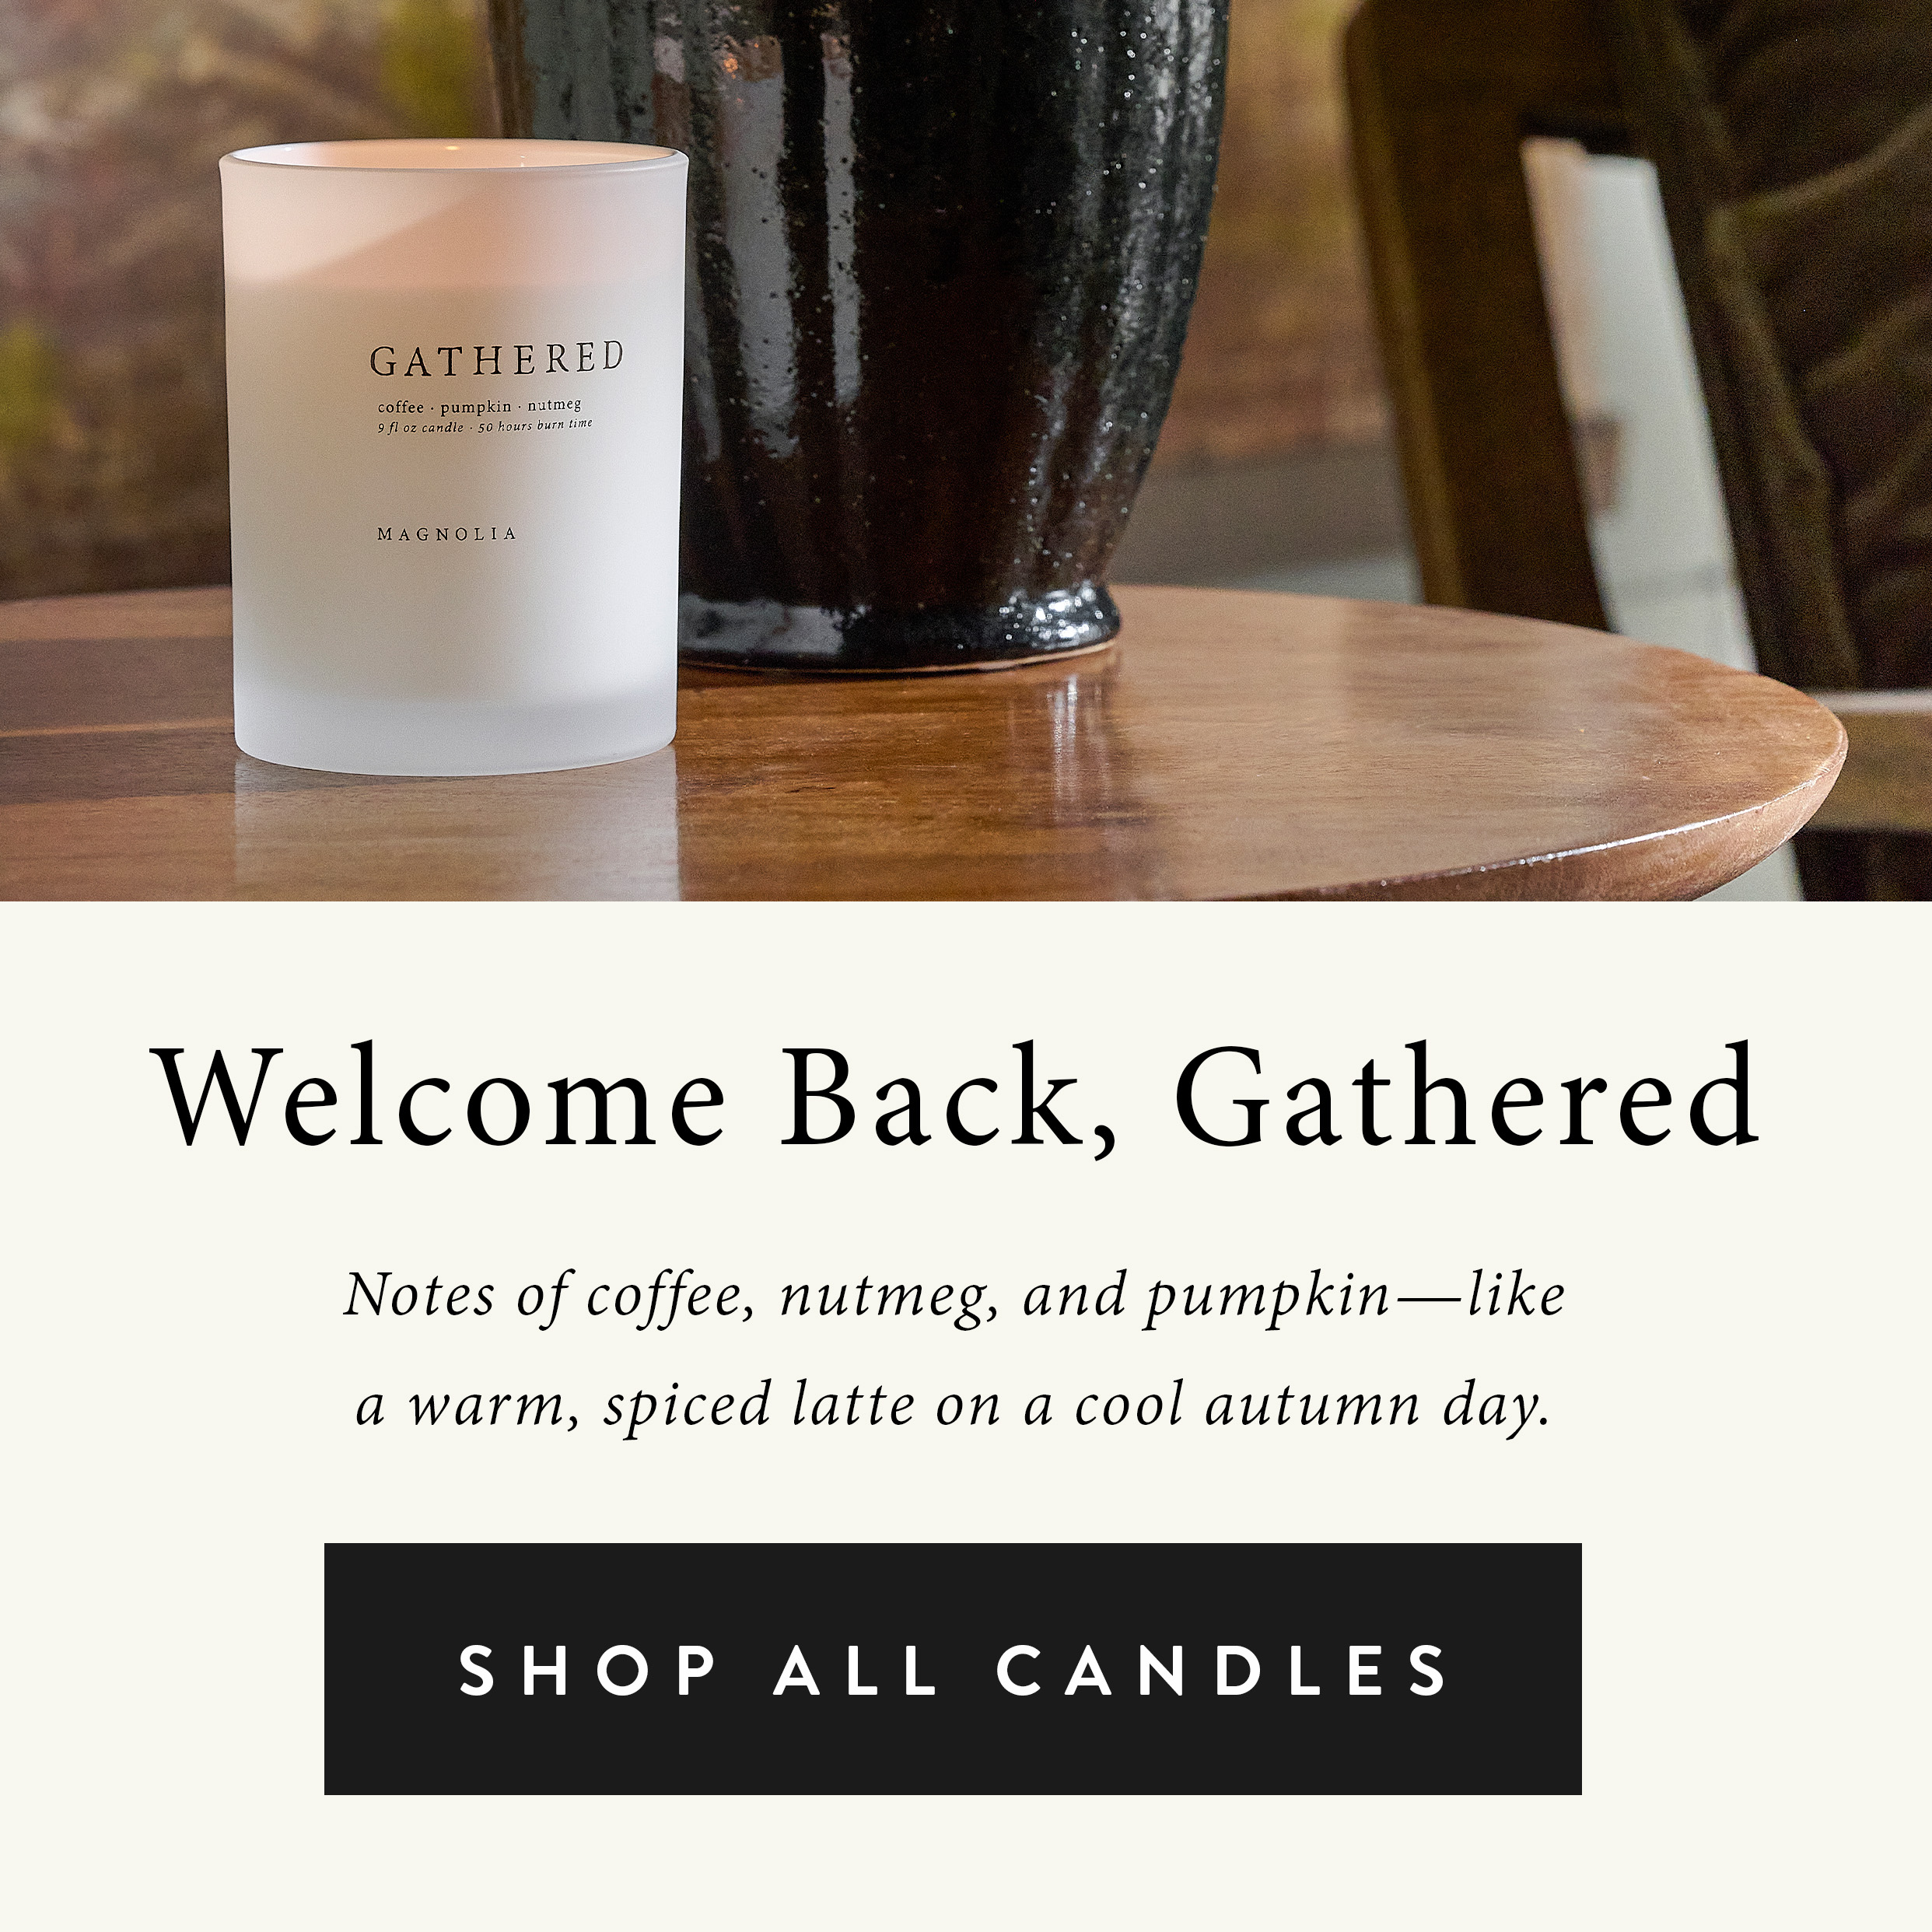 Welcome back, gathered!  Notes of coffee, nutmeg, and pumpkin - like a warm, spiced latte on a cool autumn day.  Shop all candles.